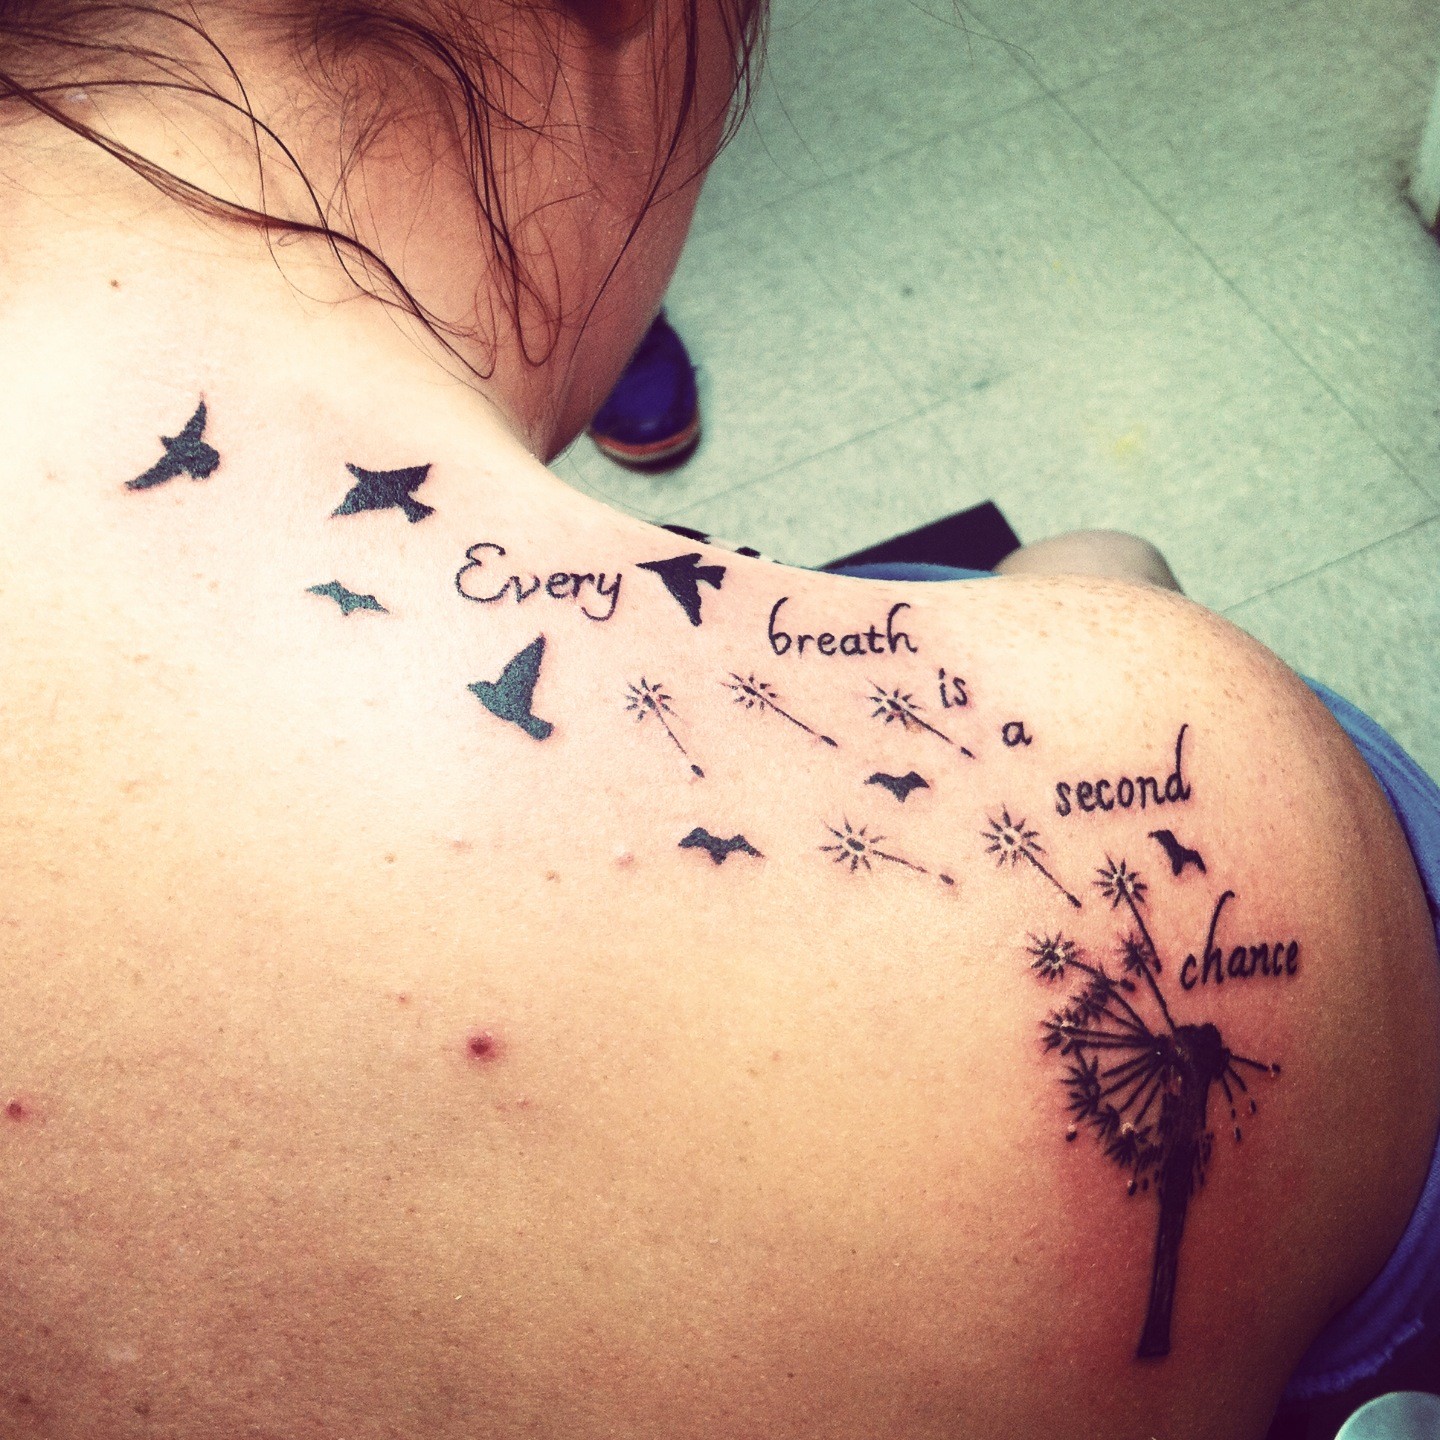 Bird tattoo design with a quote and music notes on woman's back.